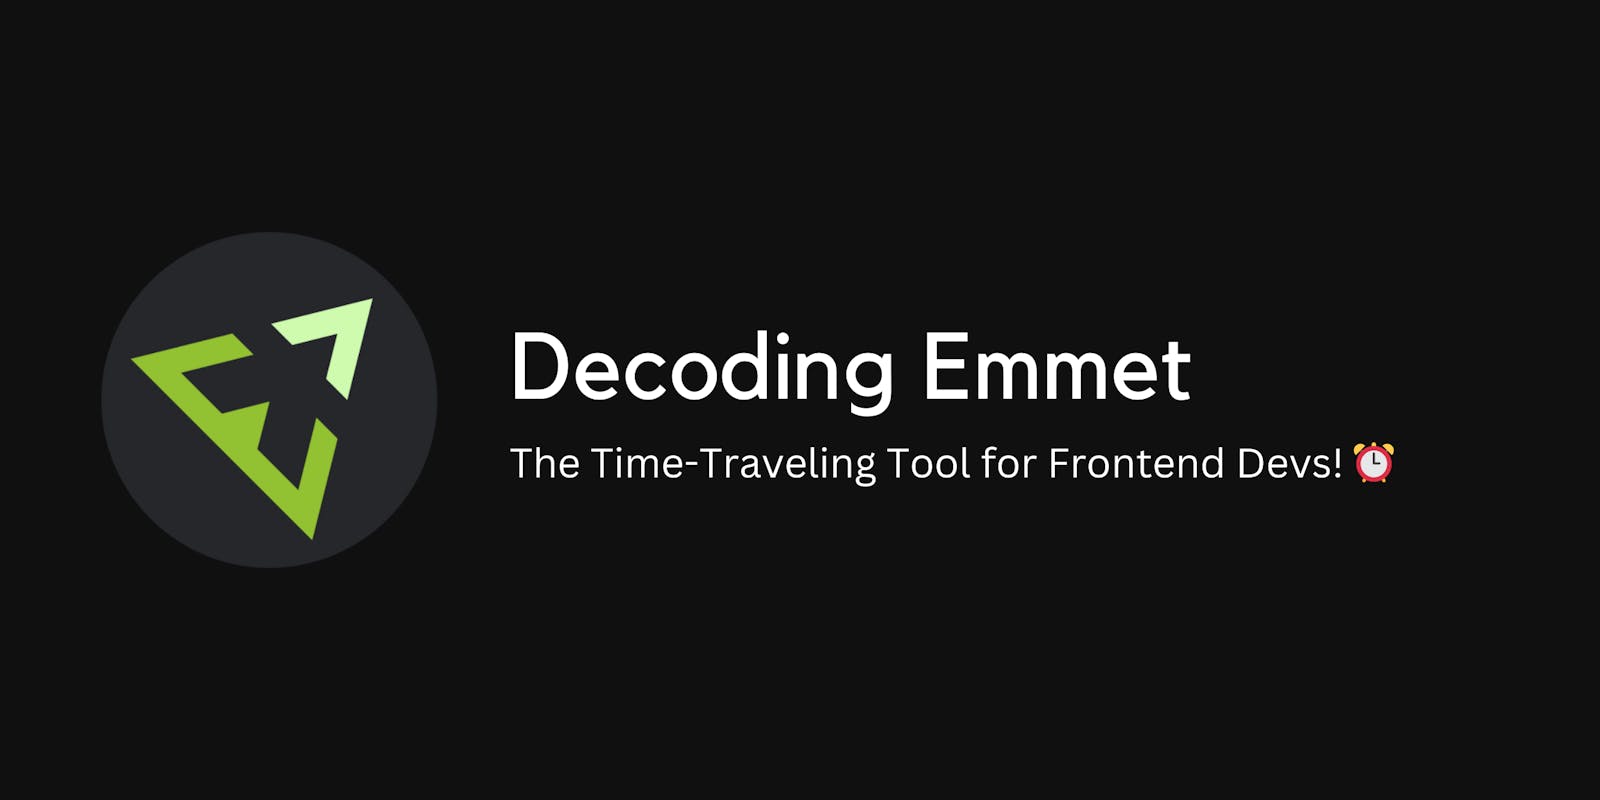 🎩 Decoding Emmet: The Time-Traveling Tool for Frontend Devs! ⏰